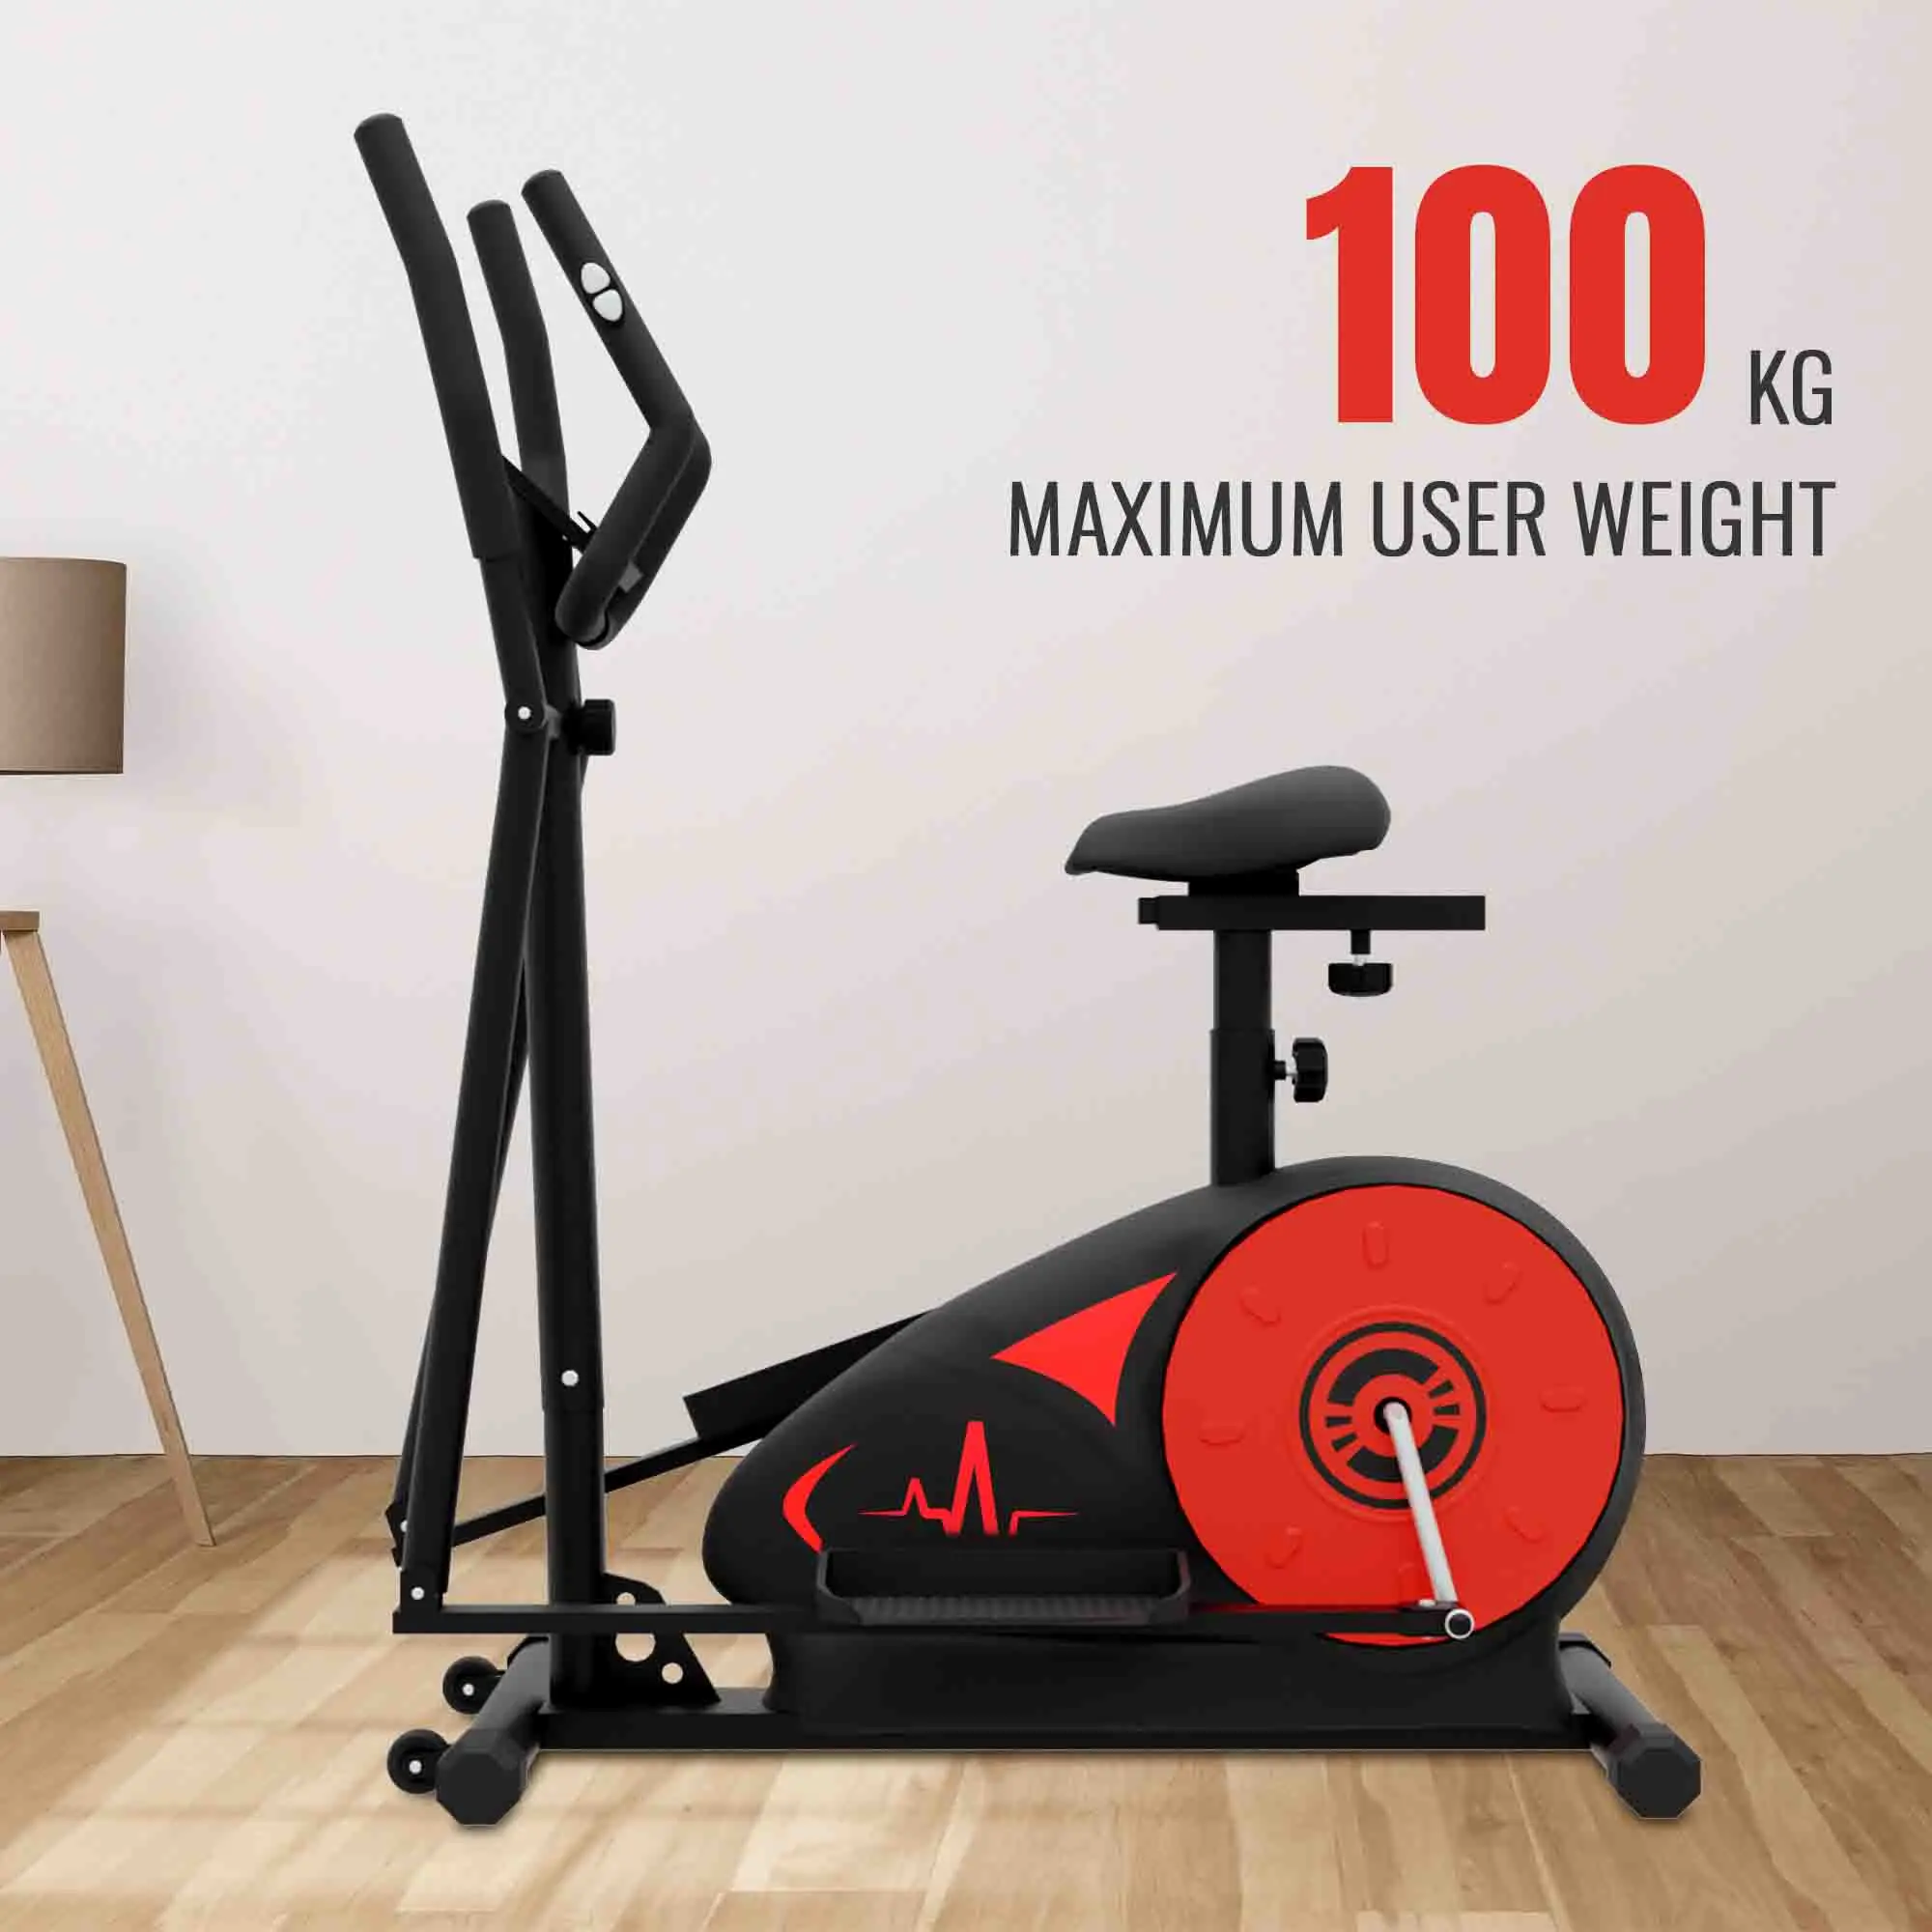 Durafit Cross Trainer EBS02 with Max user weight of 100kg